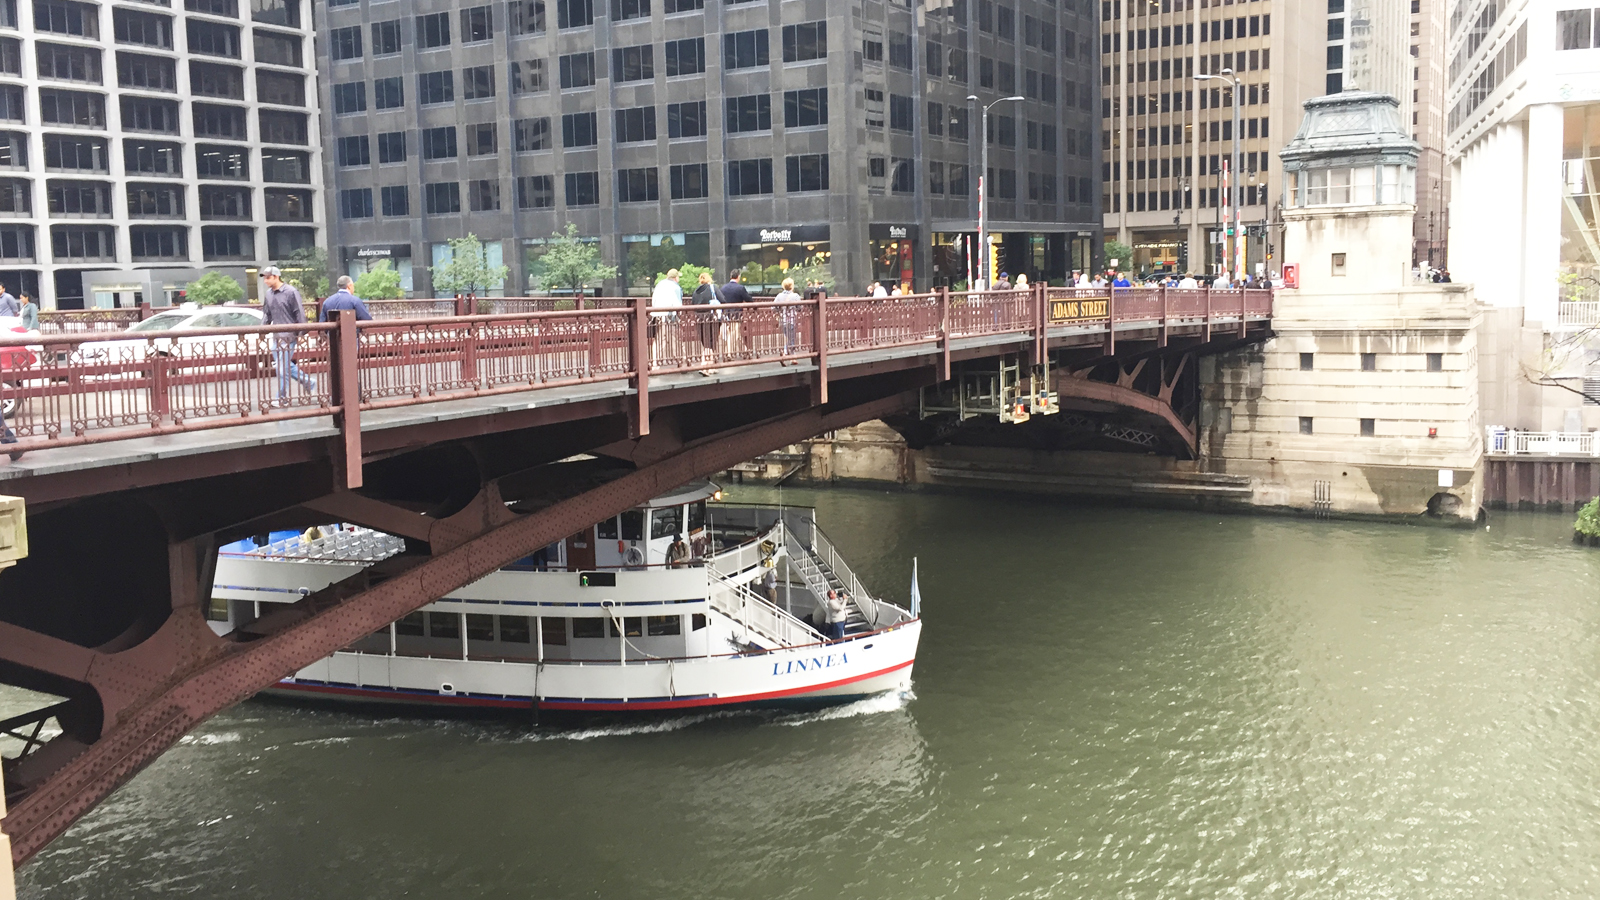 Reconstruction of the Adams Street Bridge Over the Union Station Tracks and Chicago River